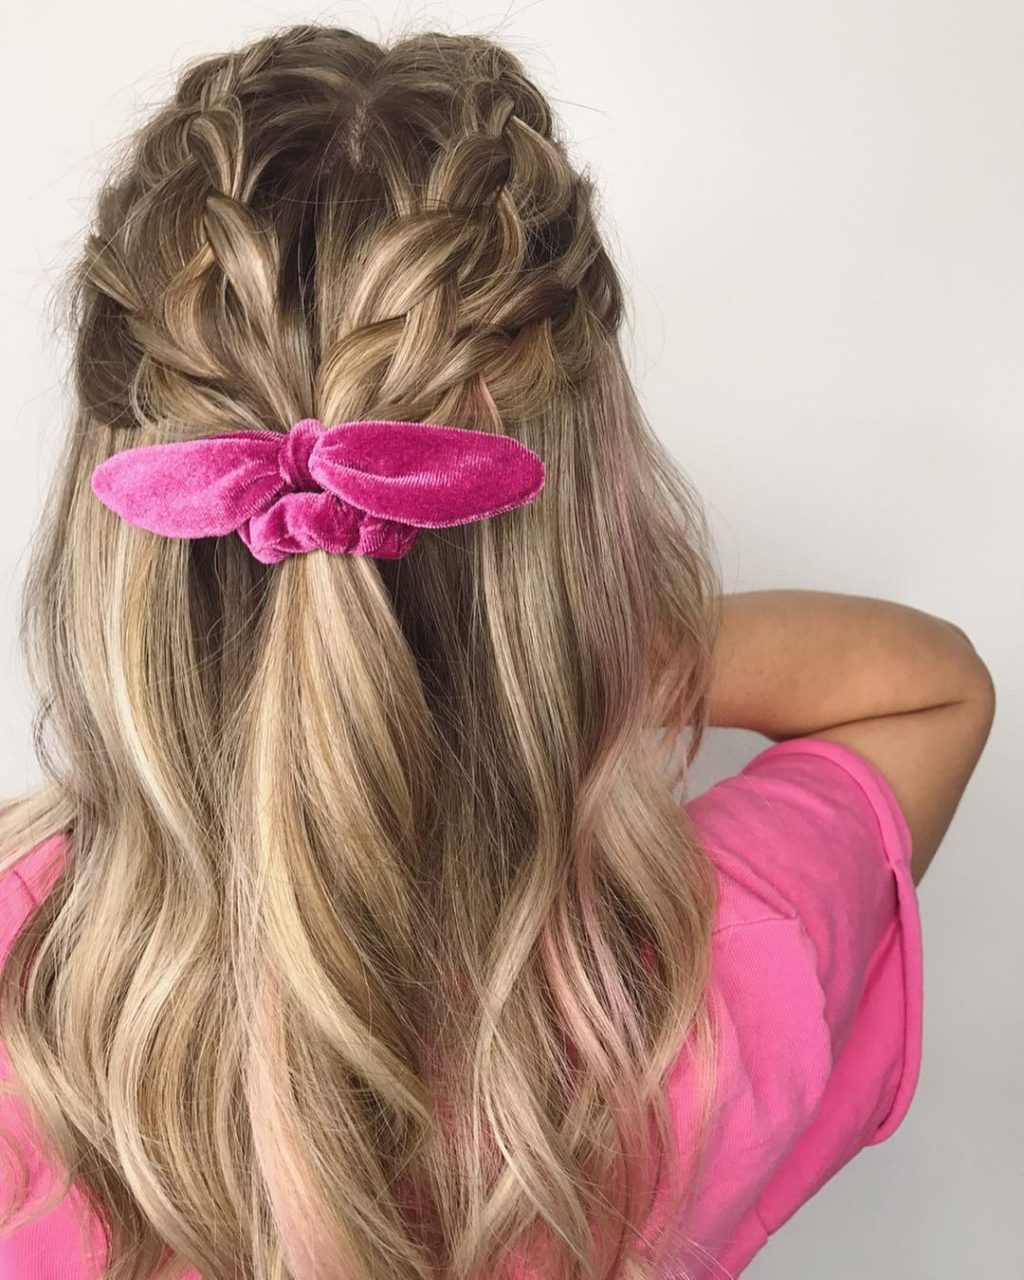 braided hair with a pink bow